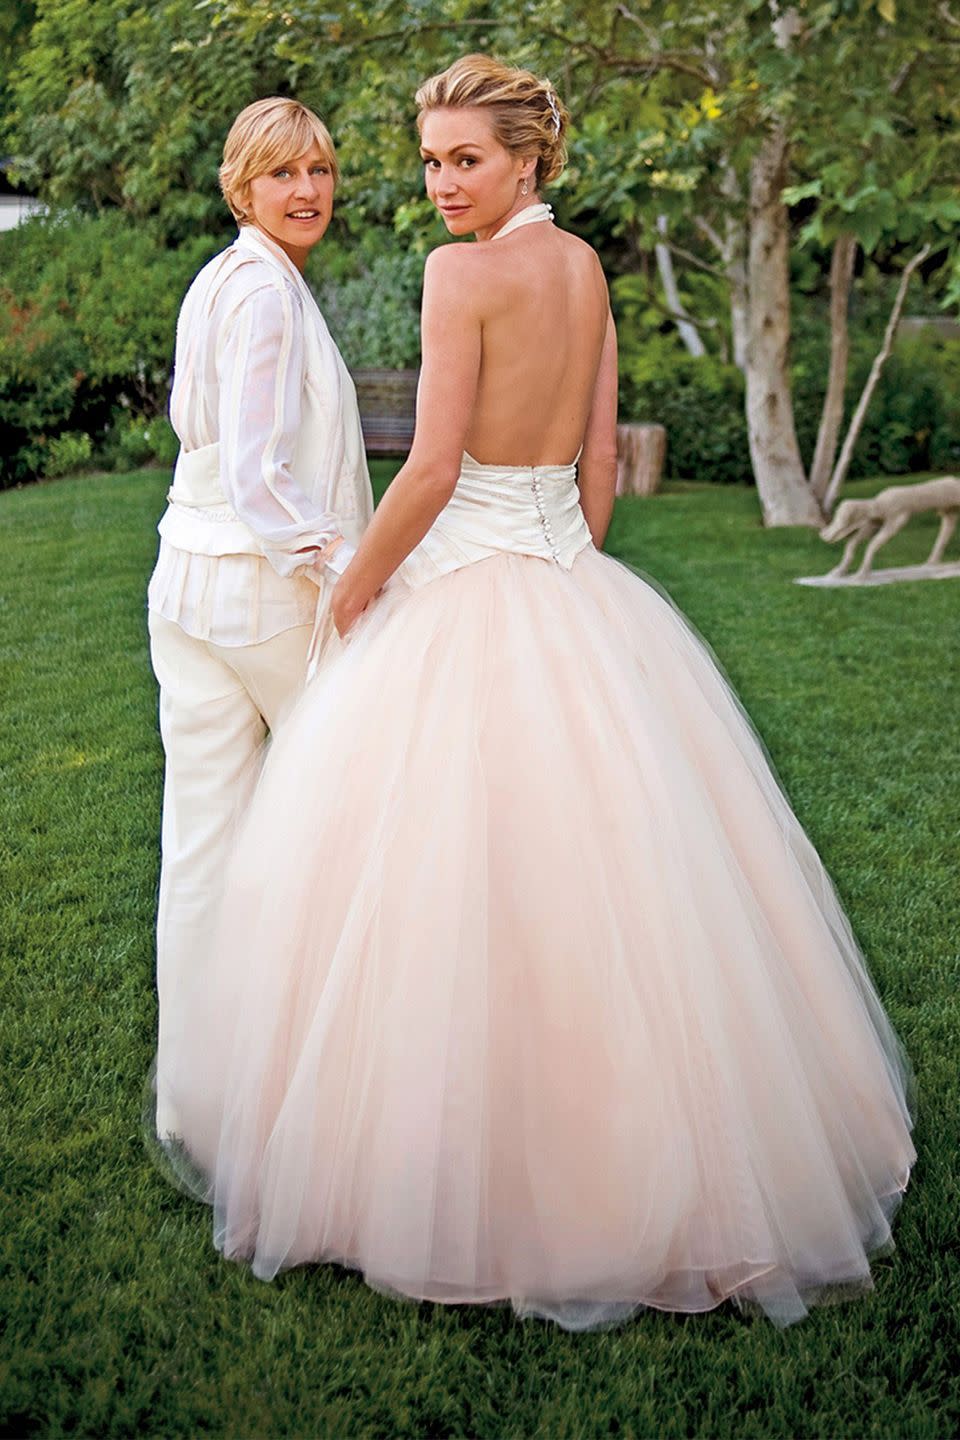 <p>The actress wed Ellen DeGeneres in a blush-pink ballgown with a high halter and cloud-like tulle skirt by Zac Posen. Simultaneously modern and romantic, it was fit for a fairytale.</p>